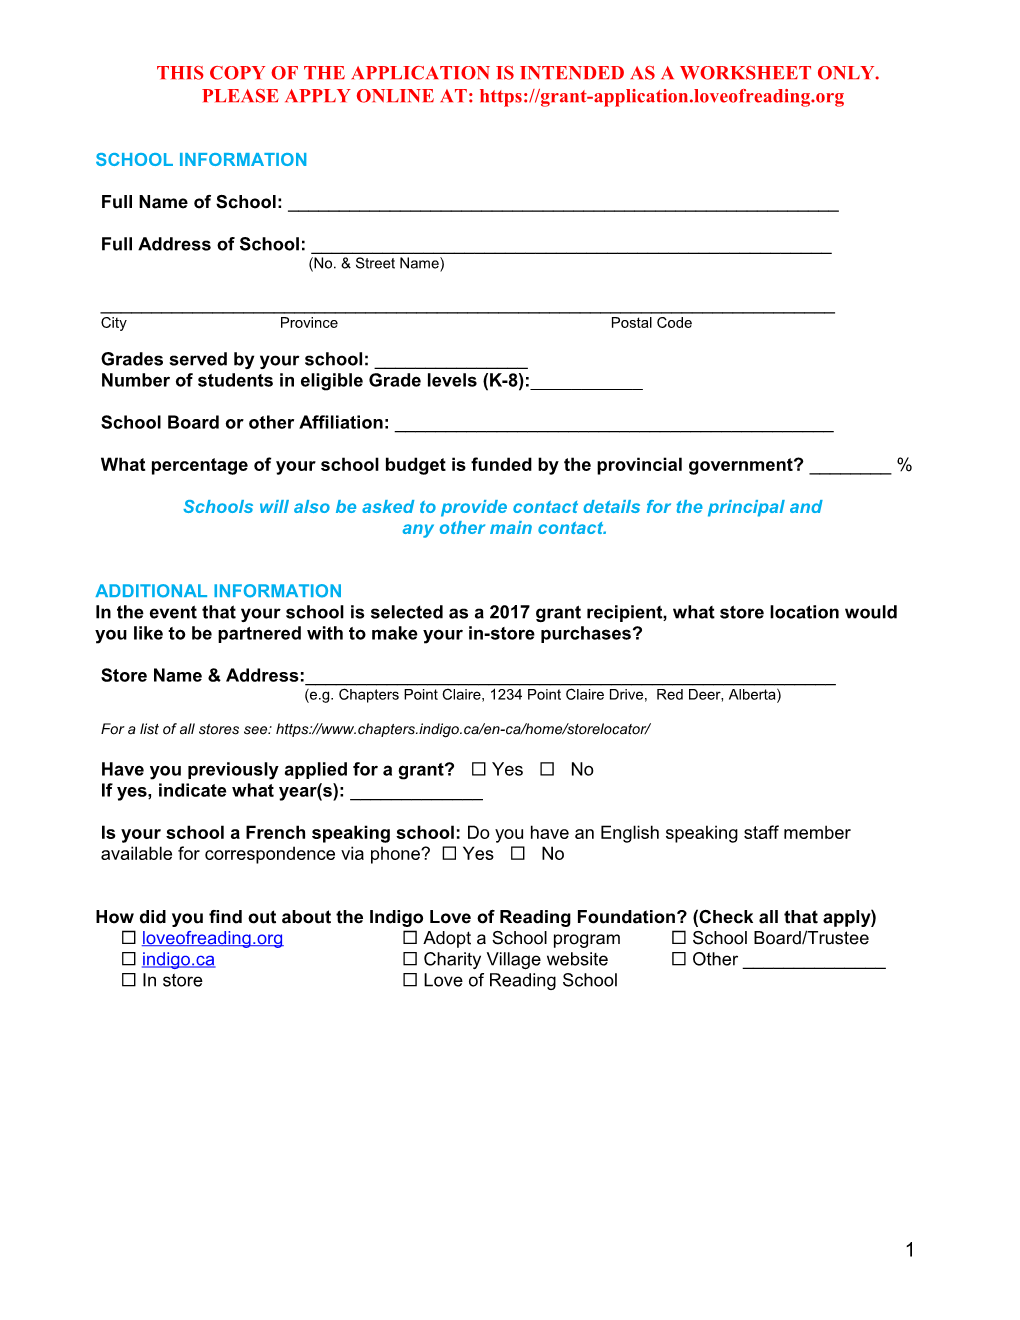 This Copy of the Application Is Intended As a Worksheet Only